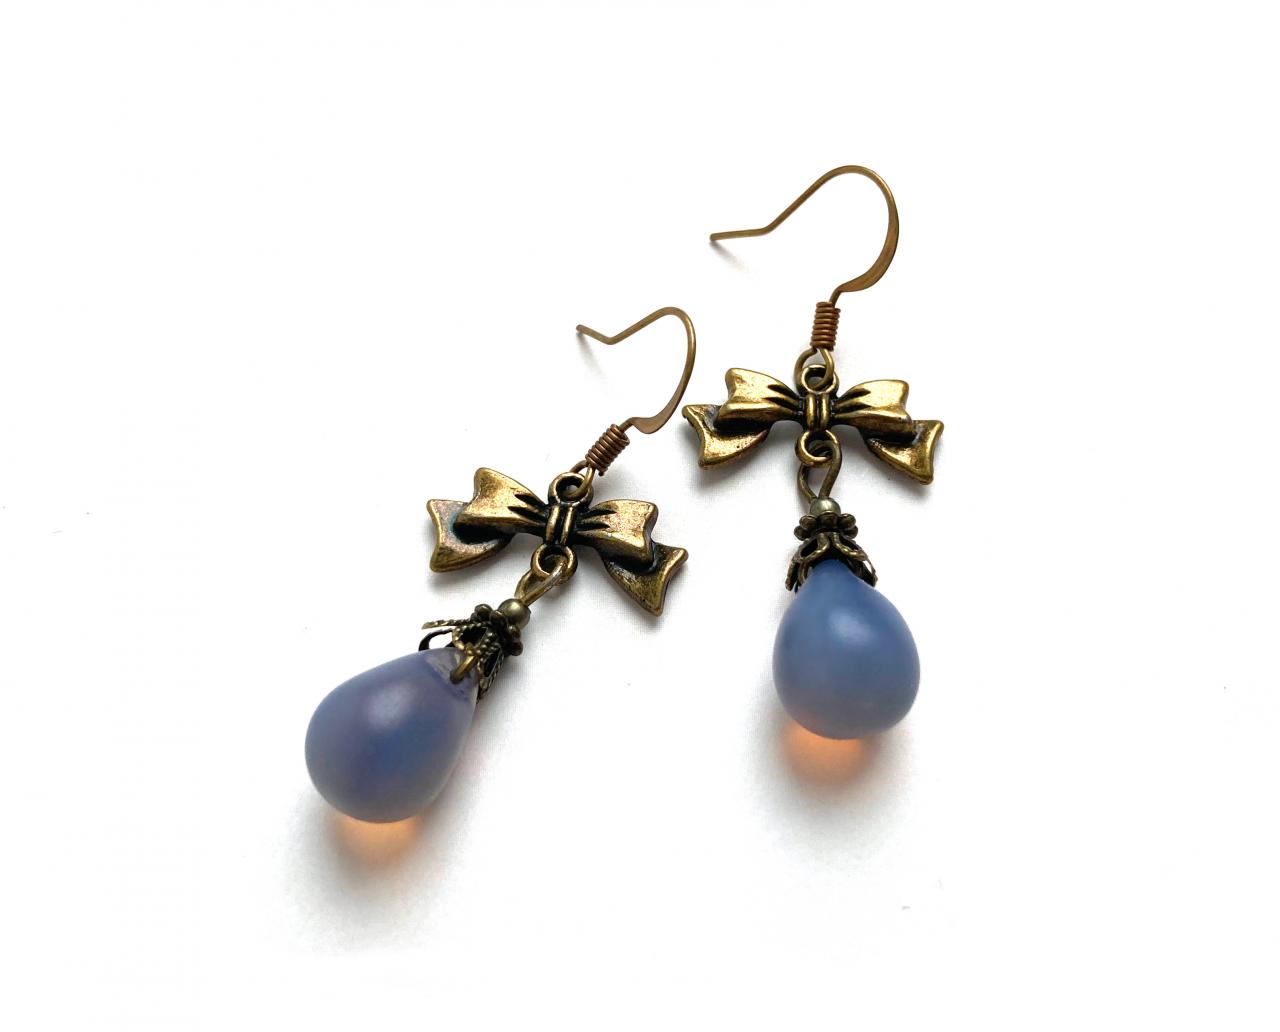  Cute earrings with bow charms and glass teardrop beads, Selma Dreams